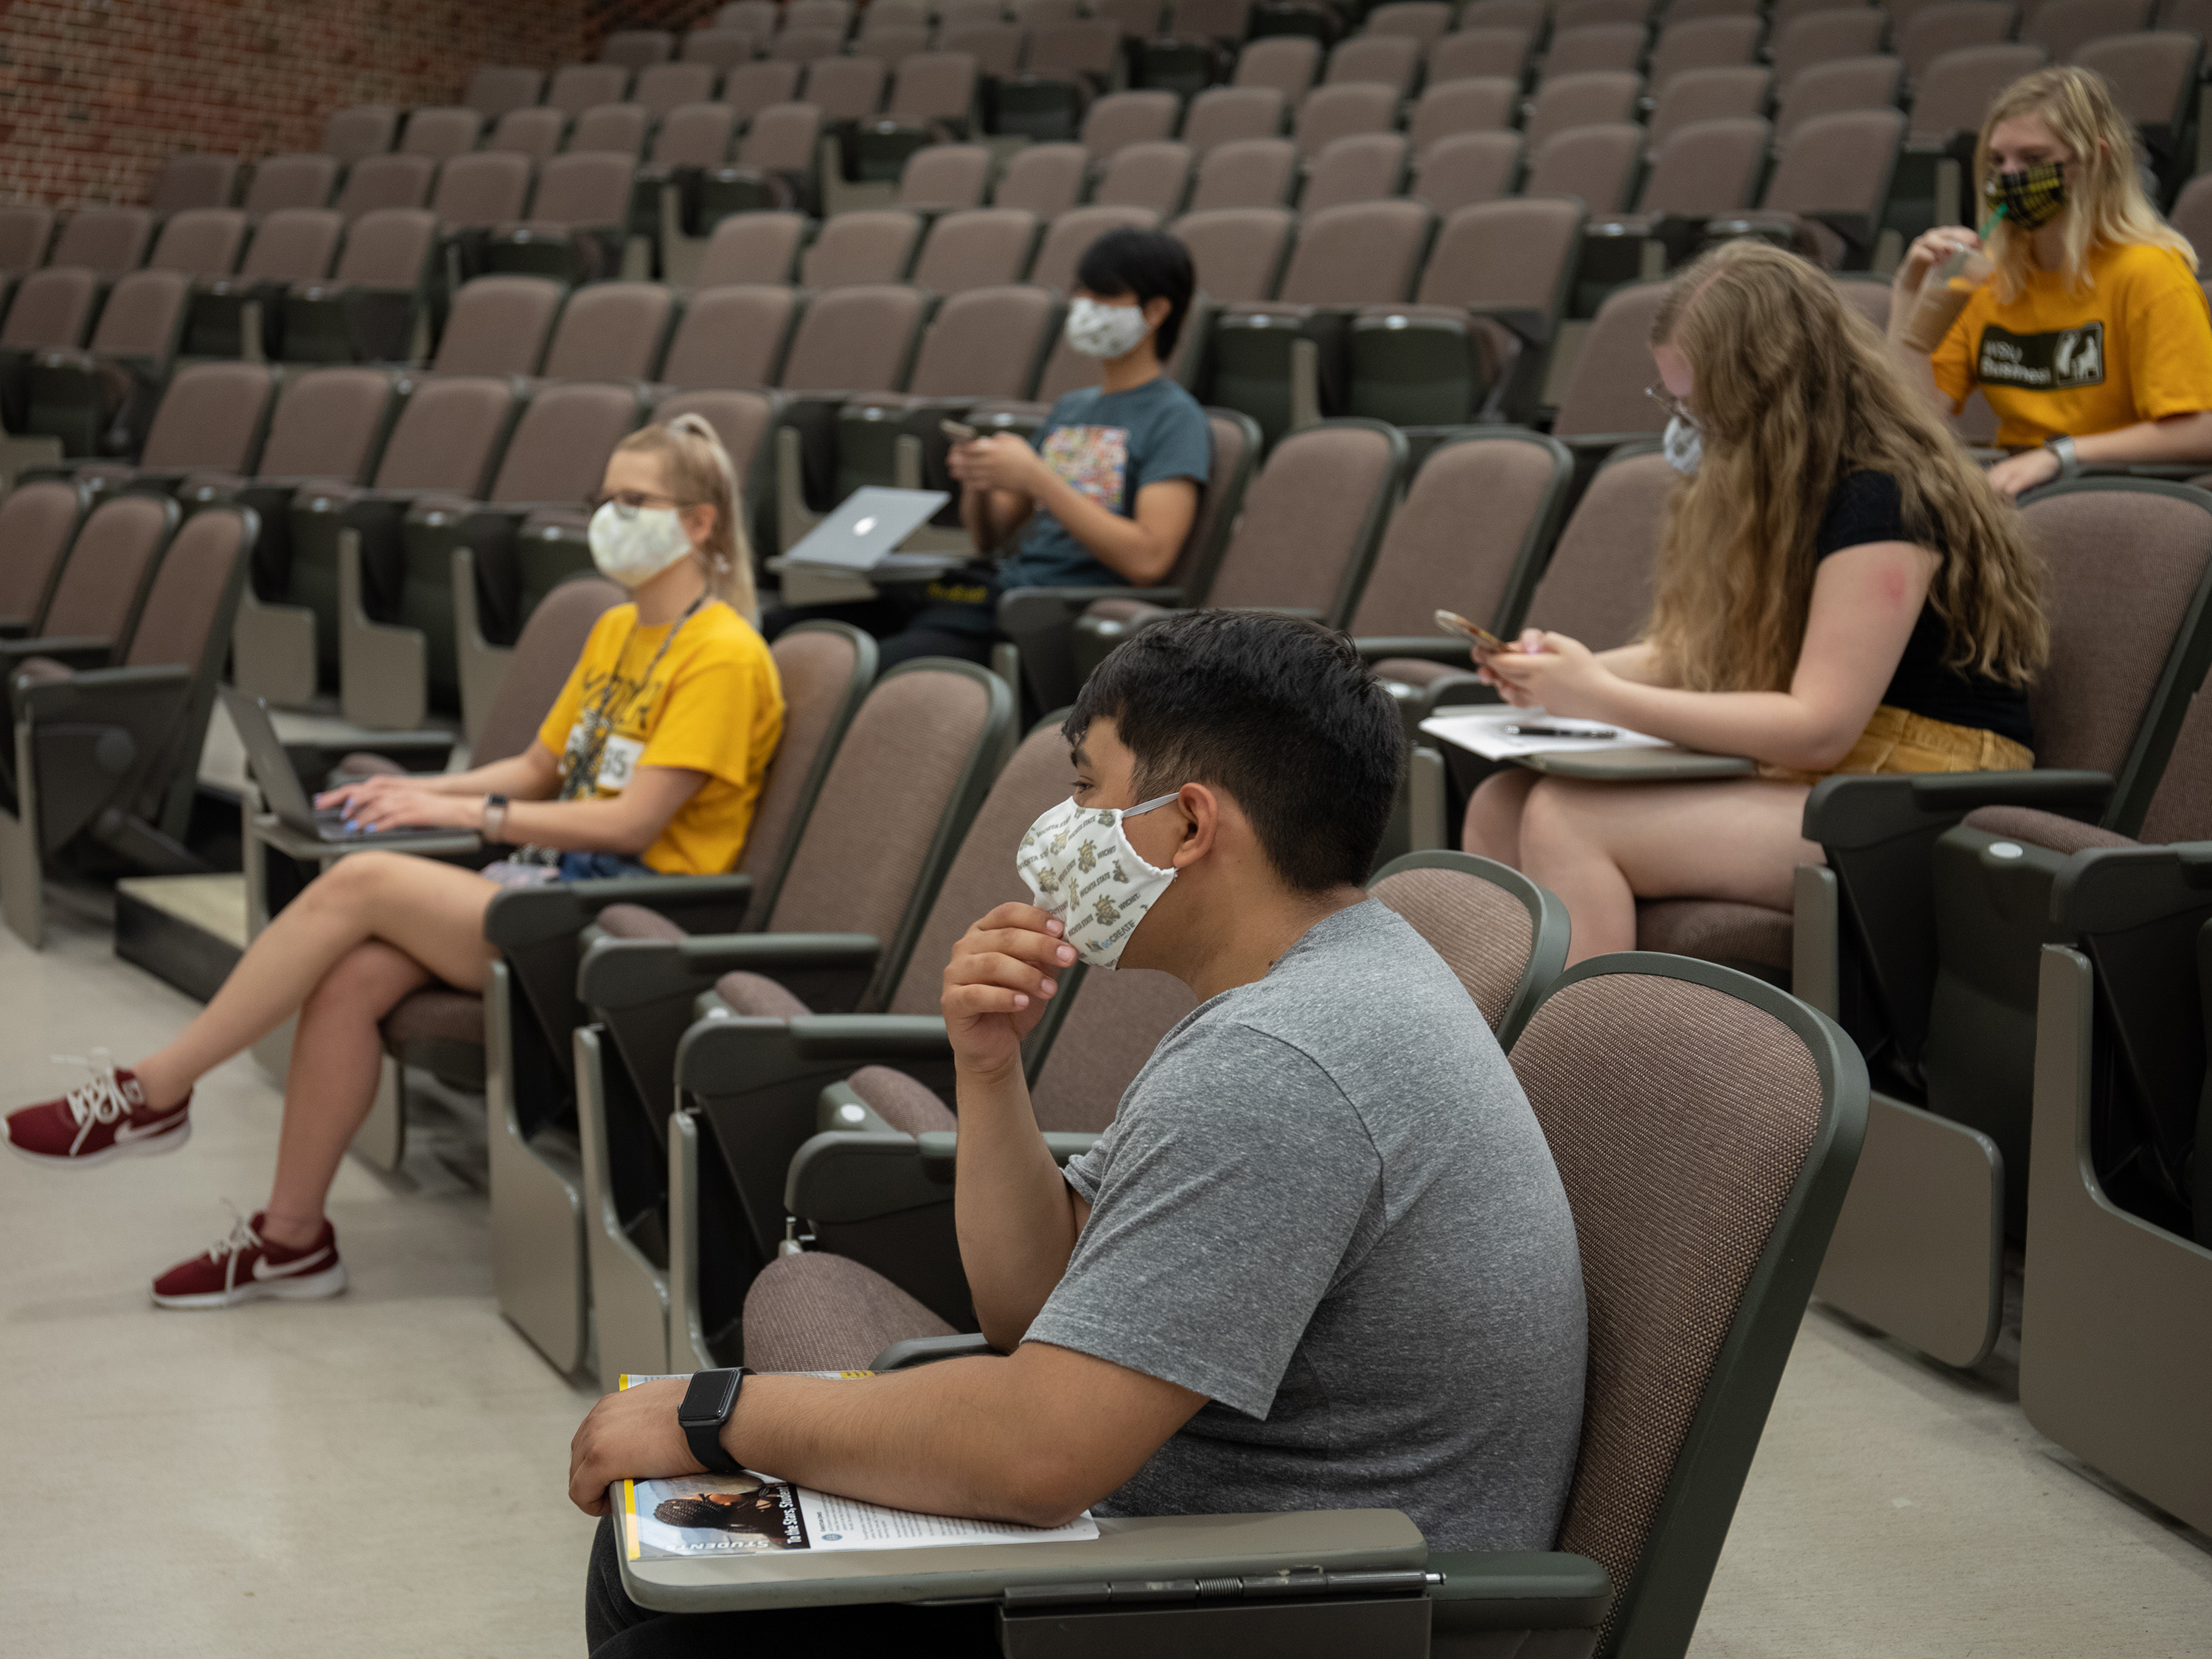 Students attend class wearing face coverings.